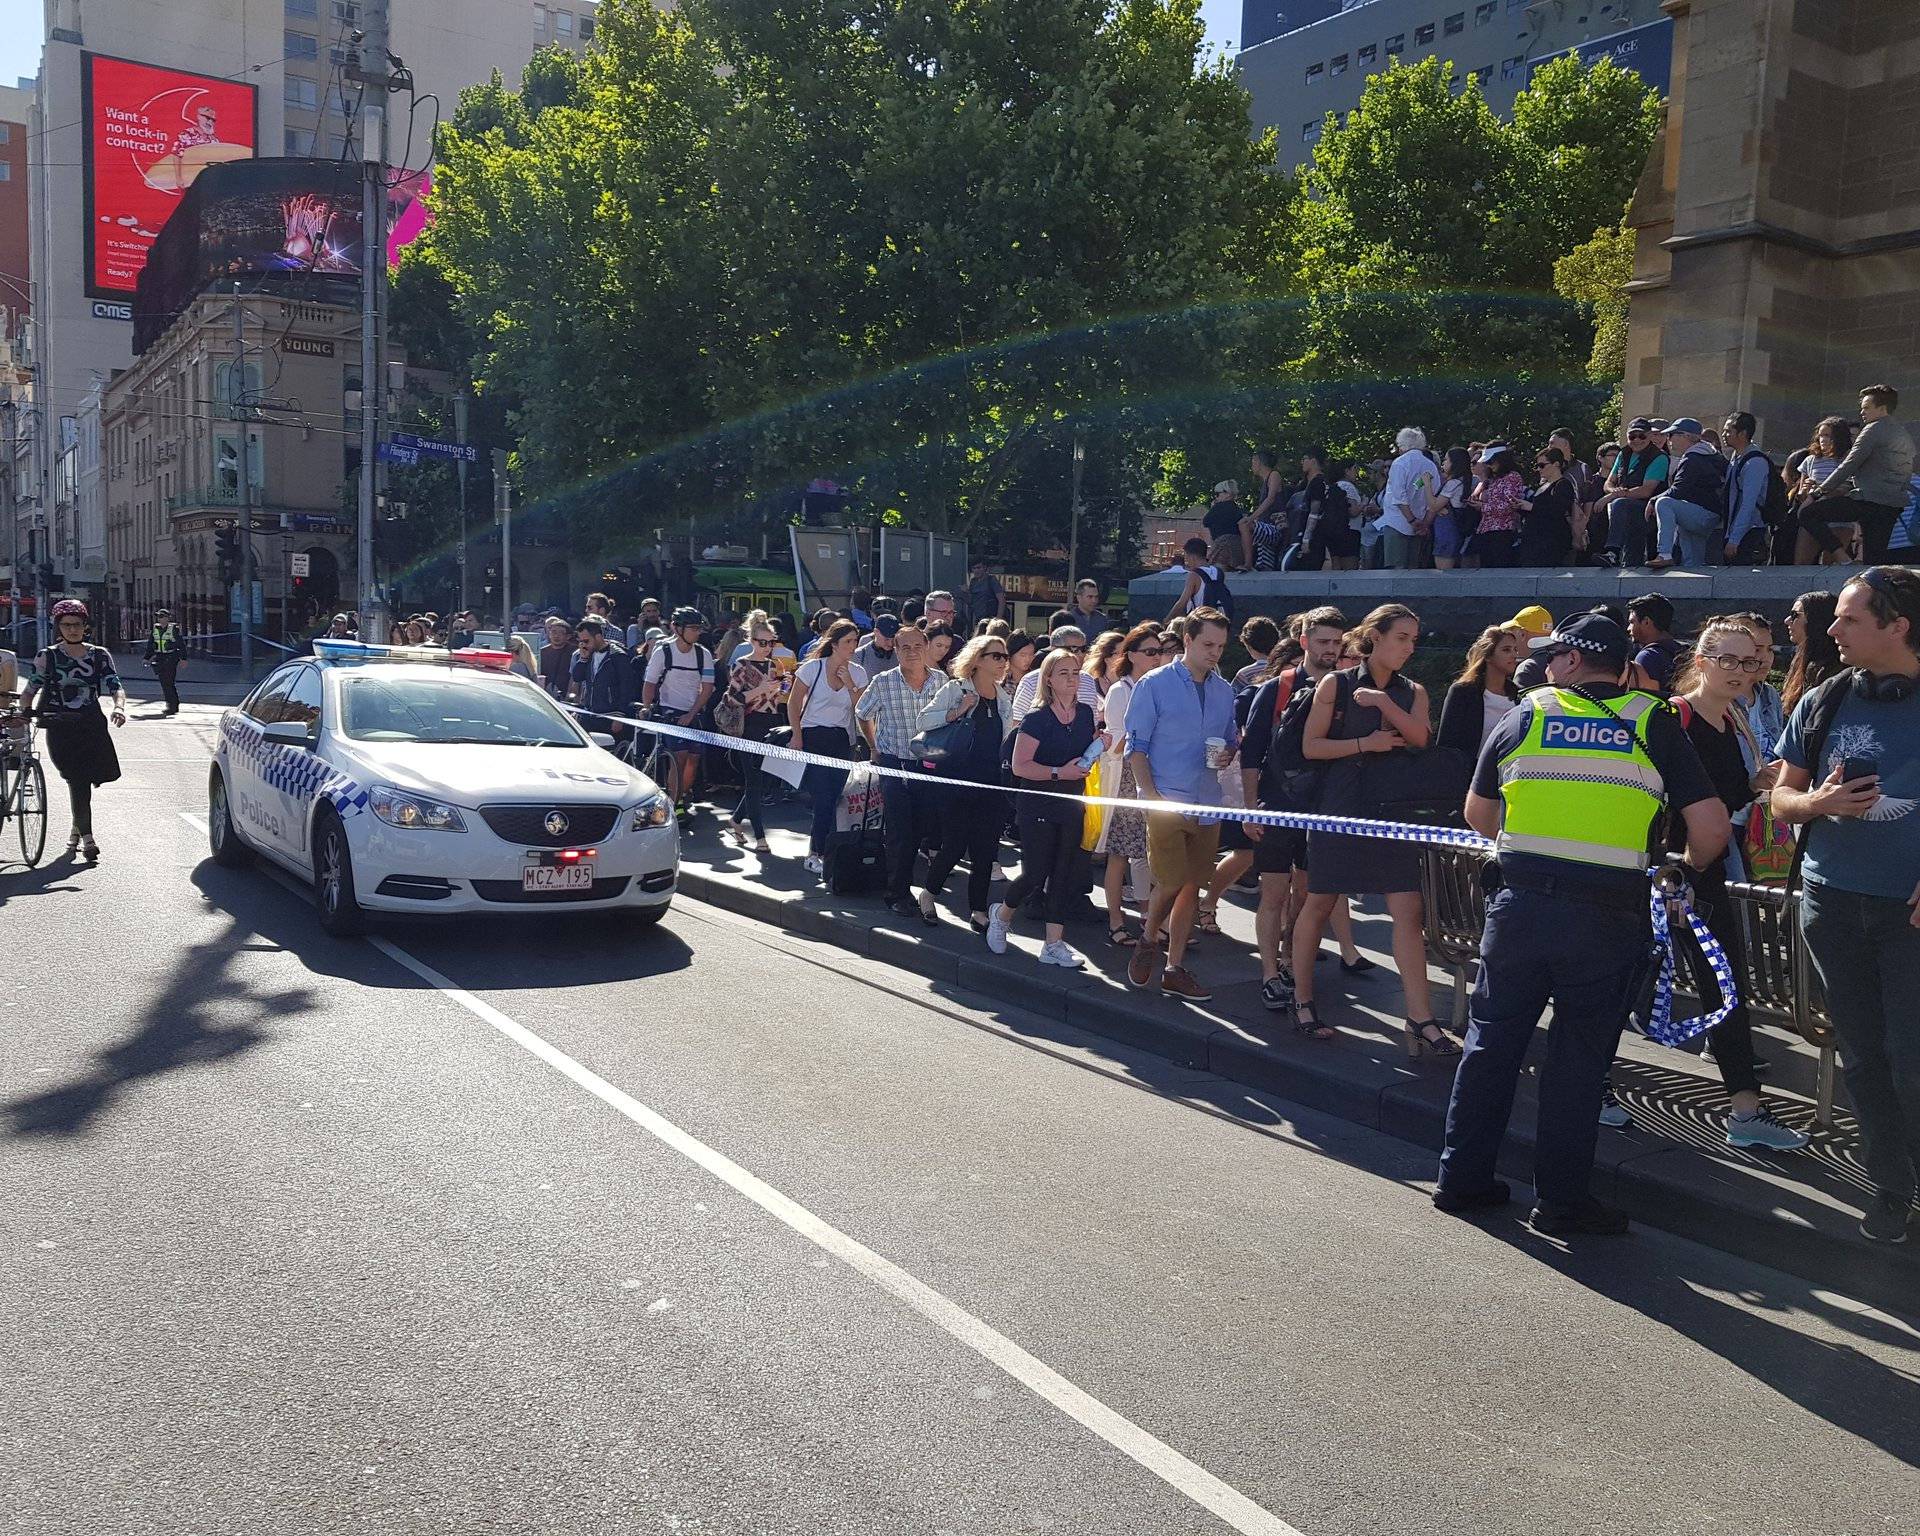 Flinders St station is blocked by the police following the car incident in Melbourne